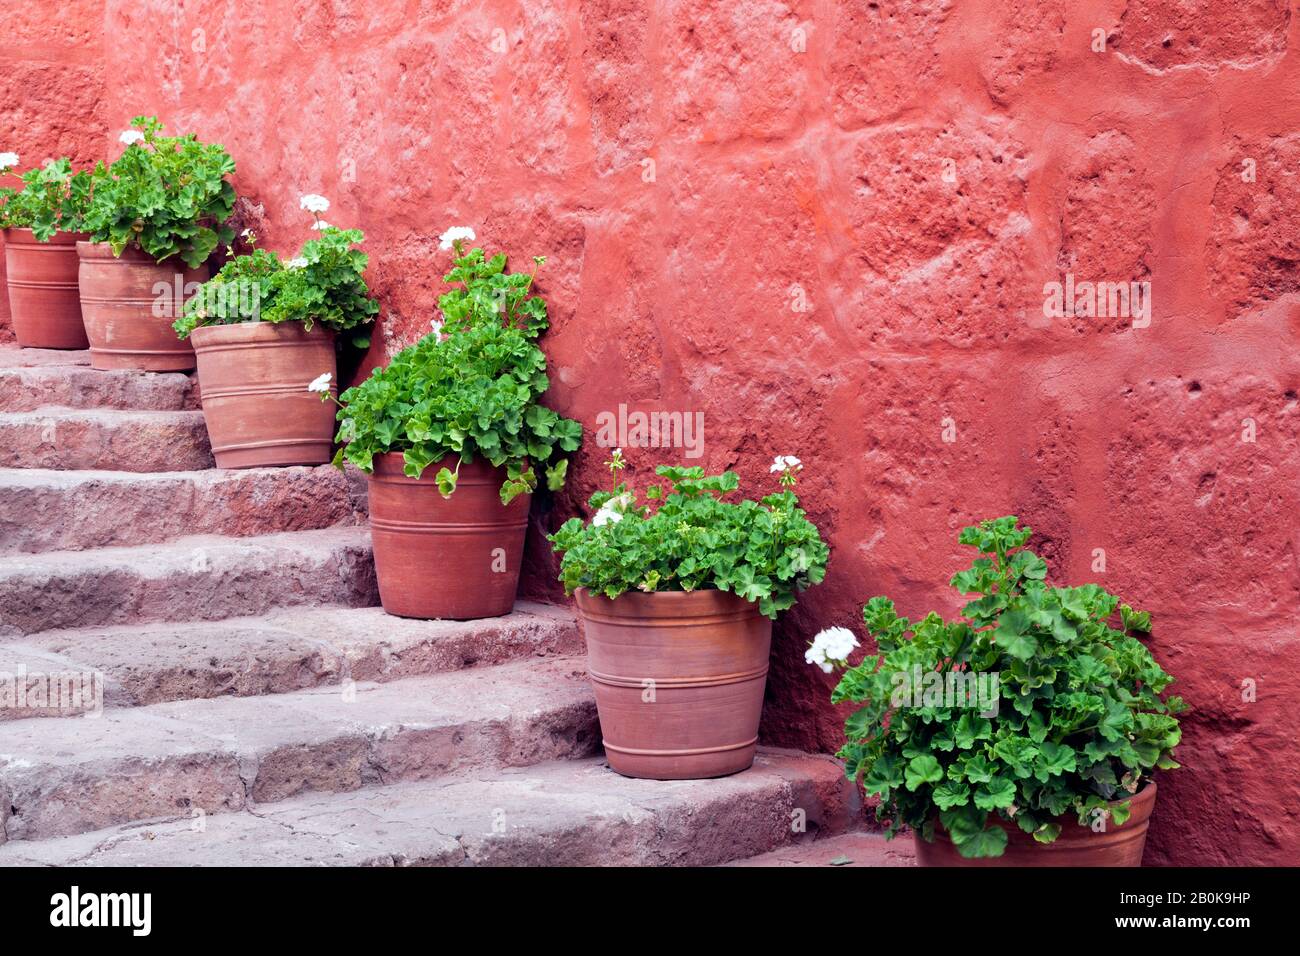 White flowering geranium plants in clay pots on stone steps against red rustic wall . Stock Photo